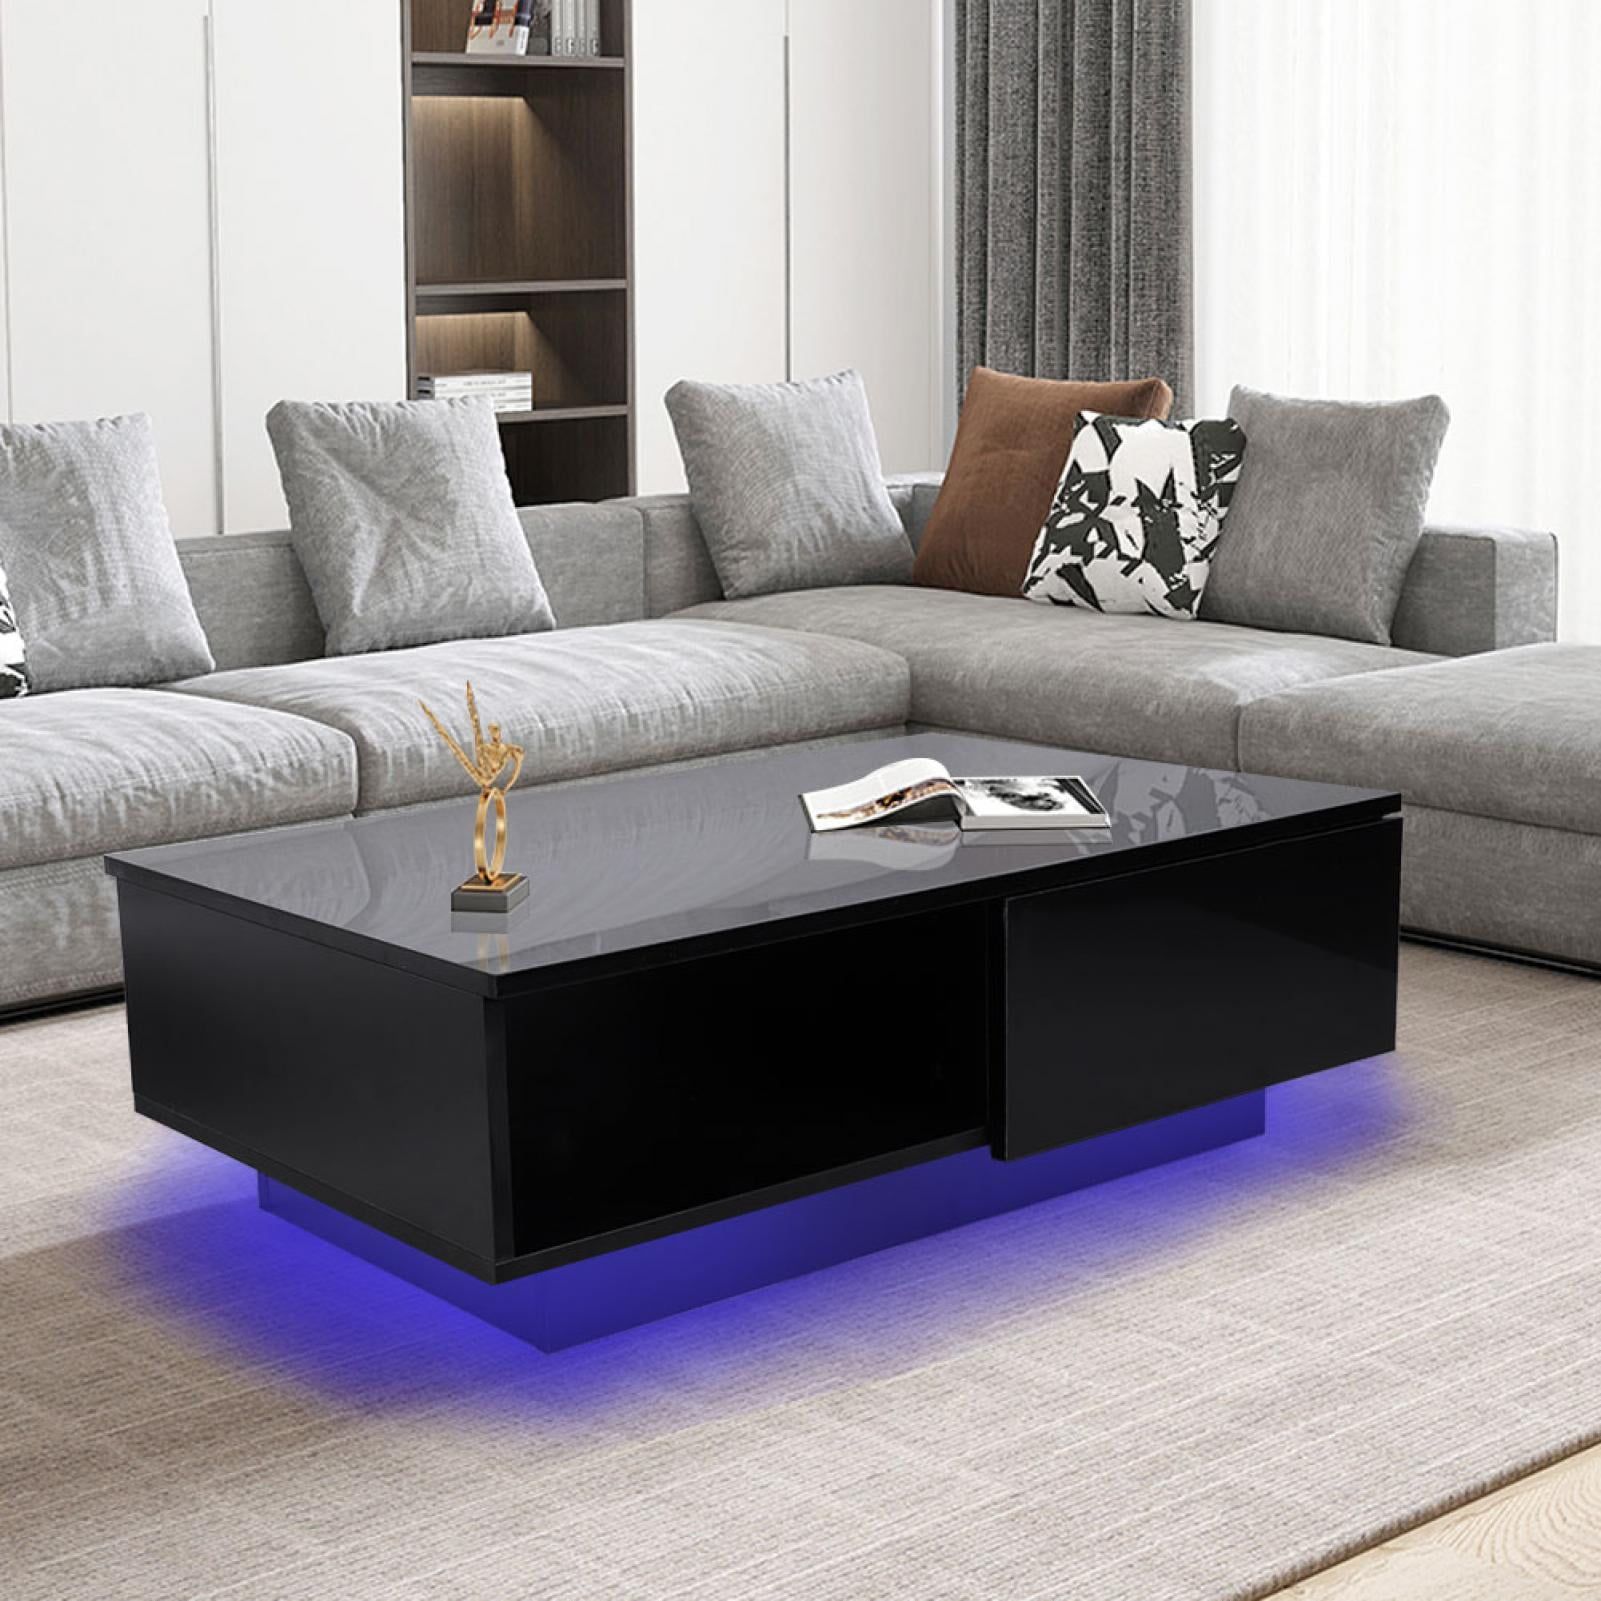 Ebtools Rectangle Led Coffee Table, Black Modern High Gloss Furniture Regarding Coffee Tables With Led Lights (View 4 of 15)